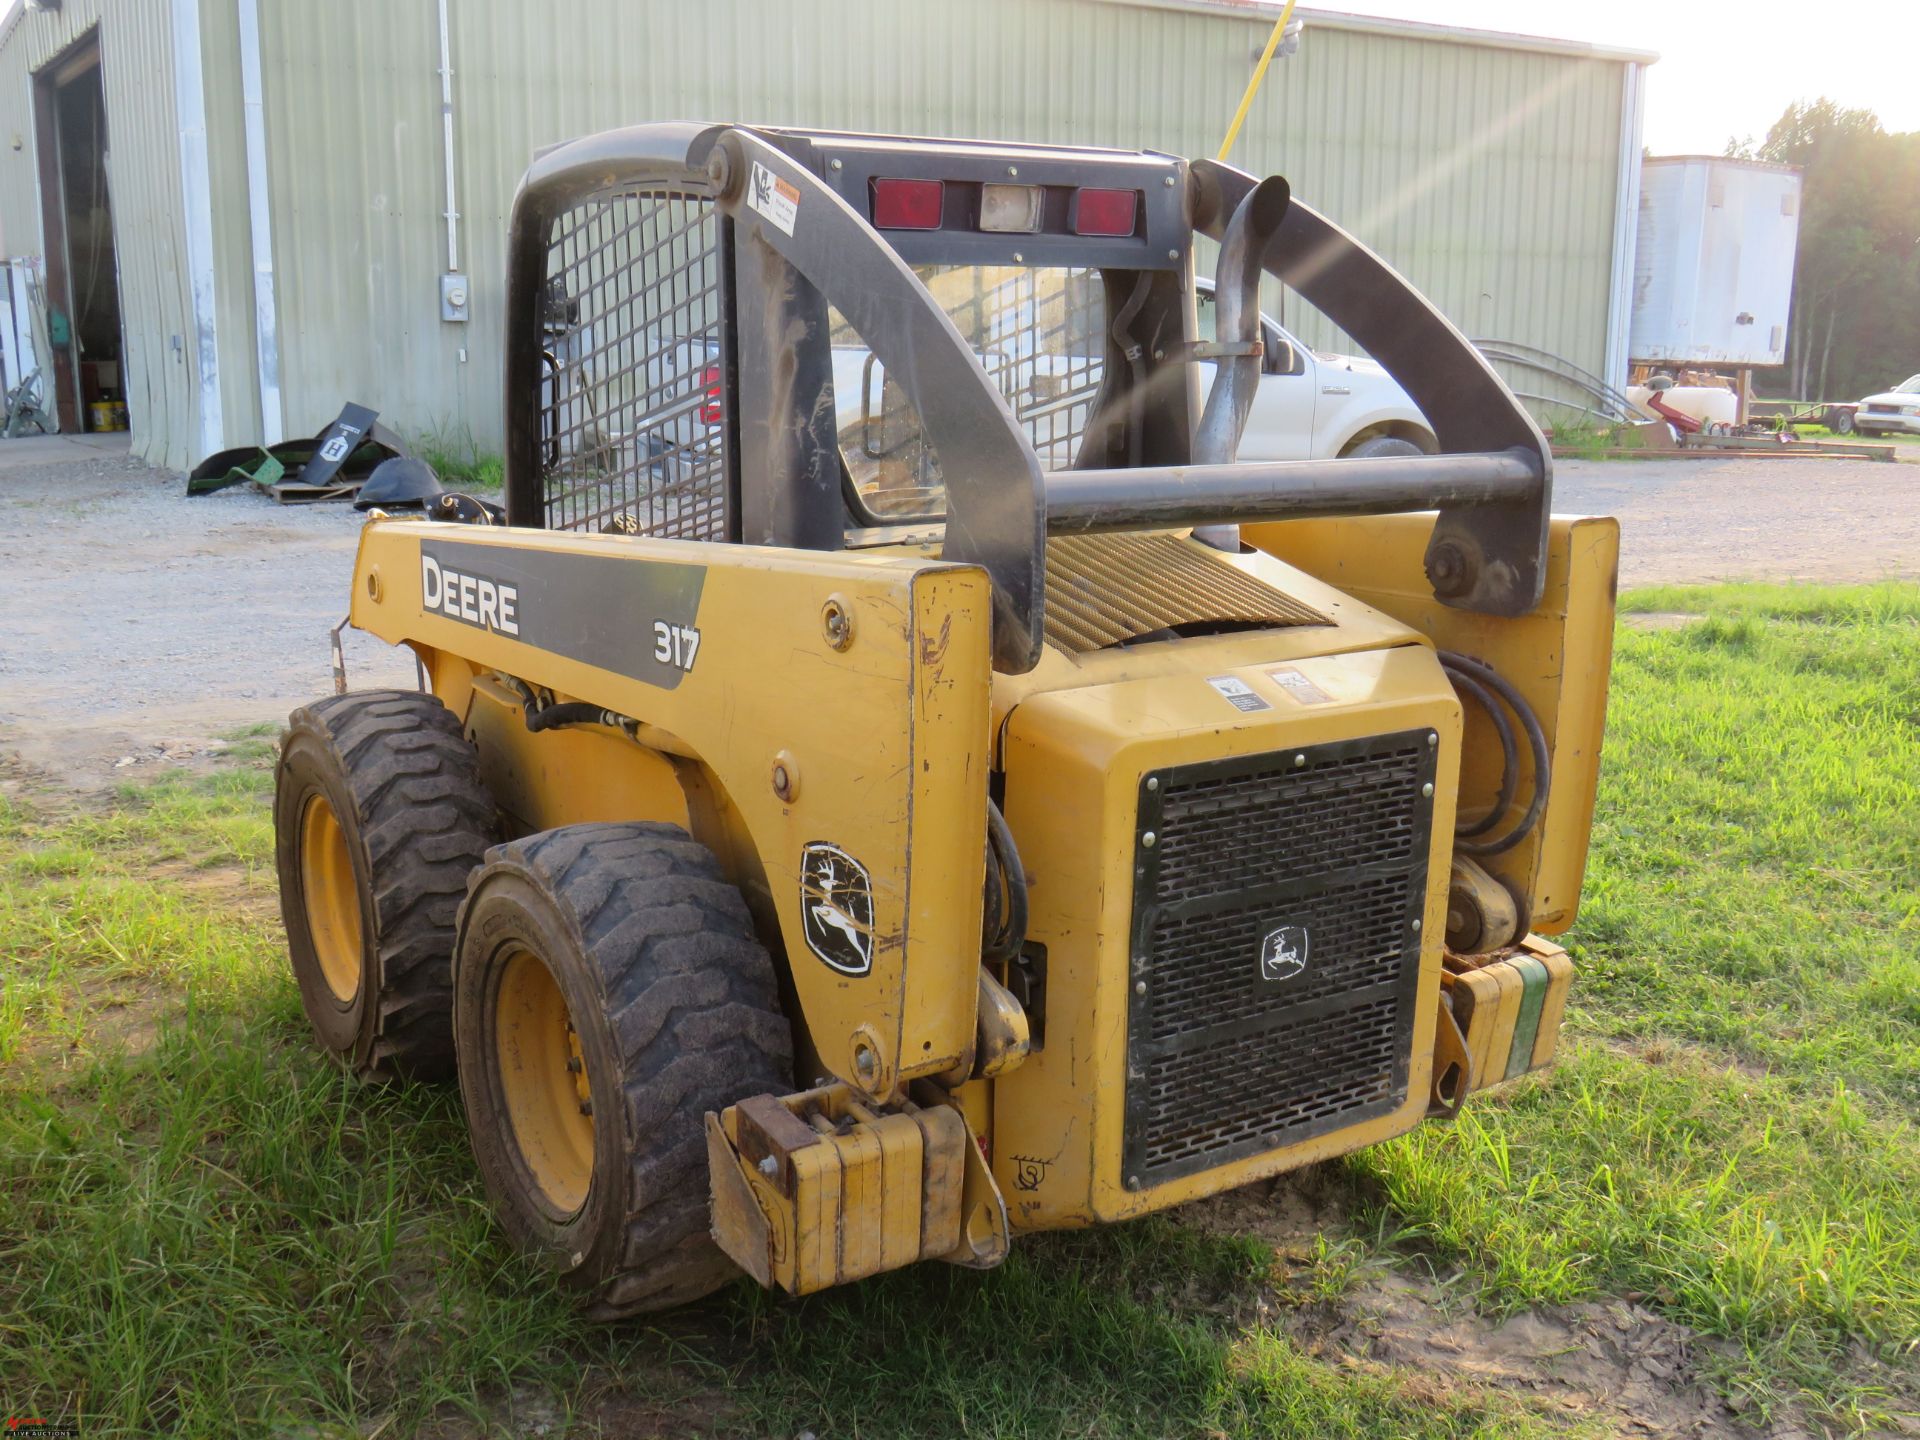 JOHN DEERE 317 RUBBER TIRE SKID STEER, AUXILIARY HYDRAULICS, 12-16.5 TIRES, REAR WEIGHTS, 2972 HOURS - Image 3 of 6